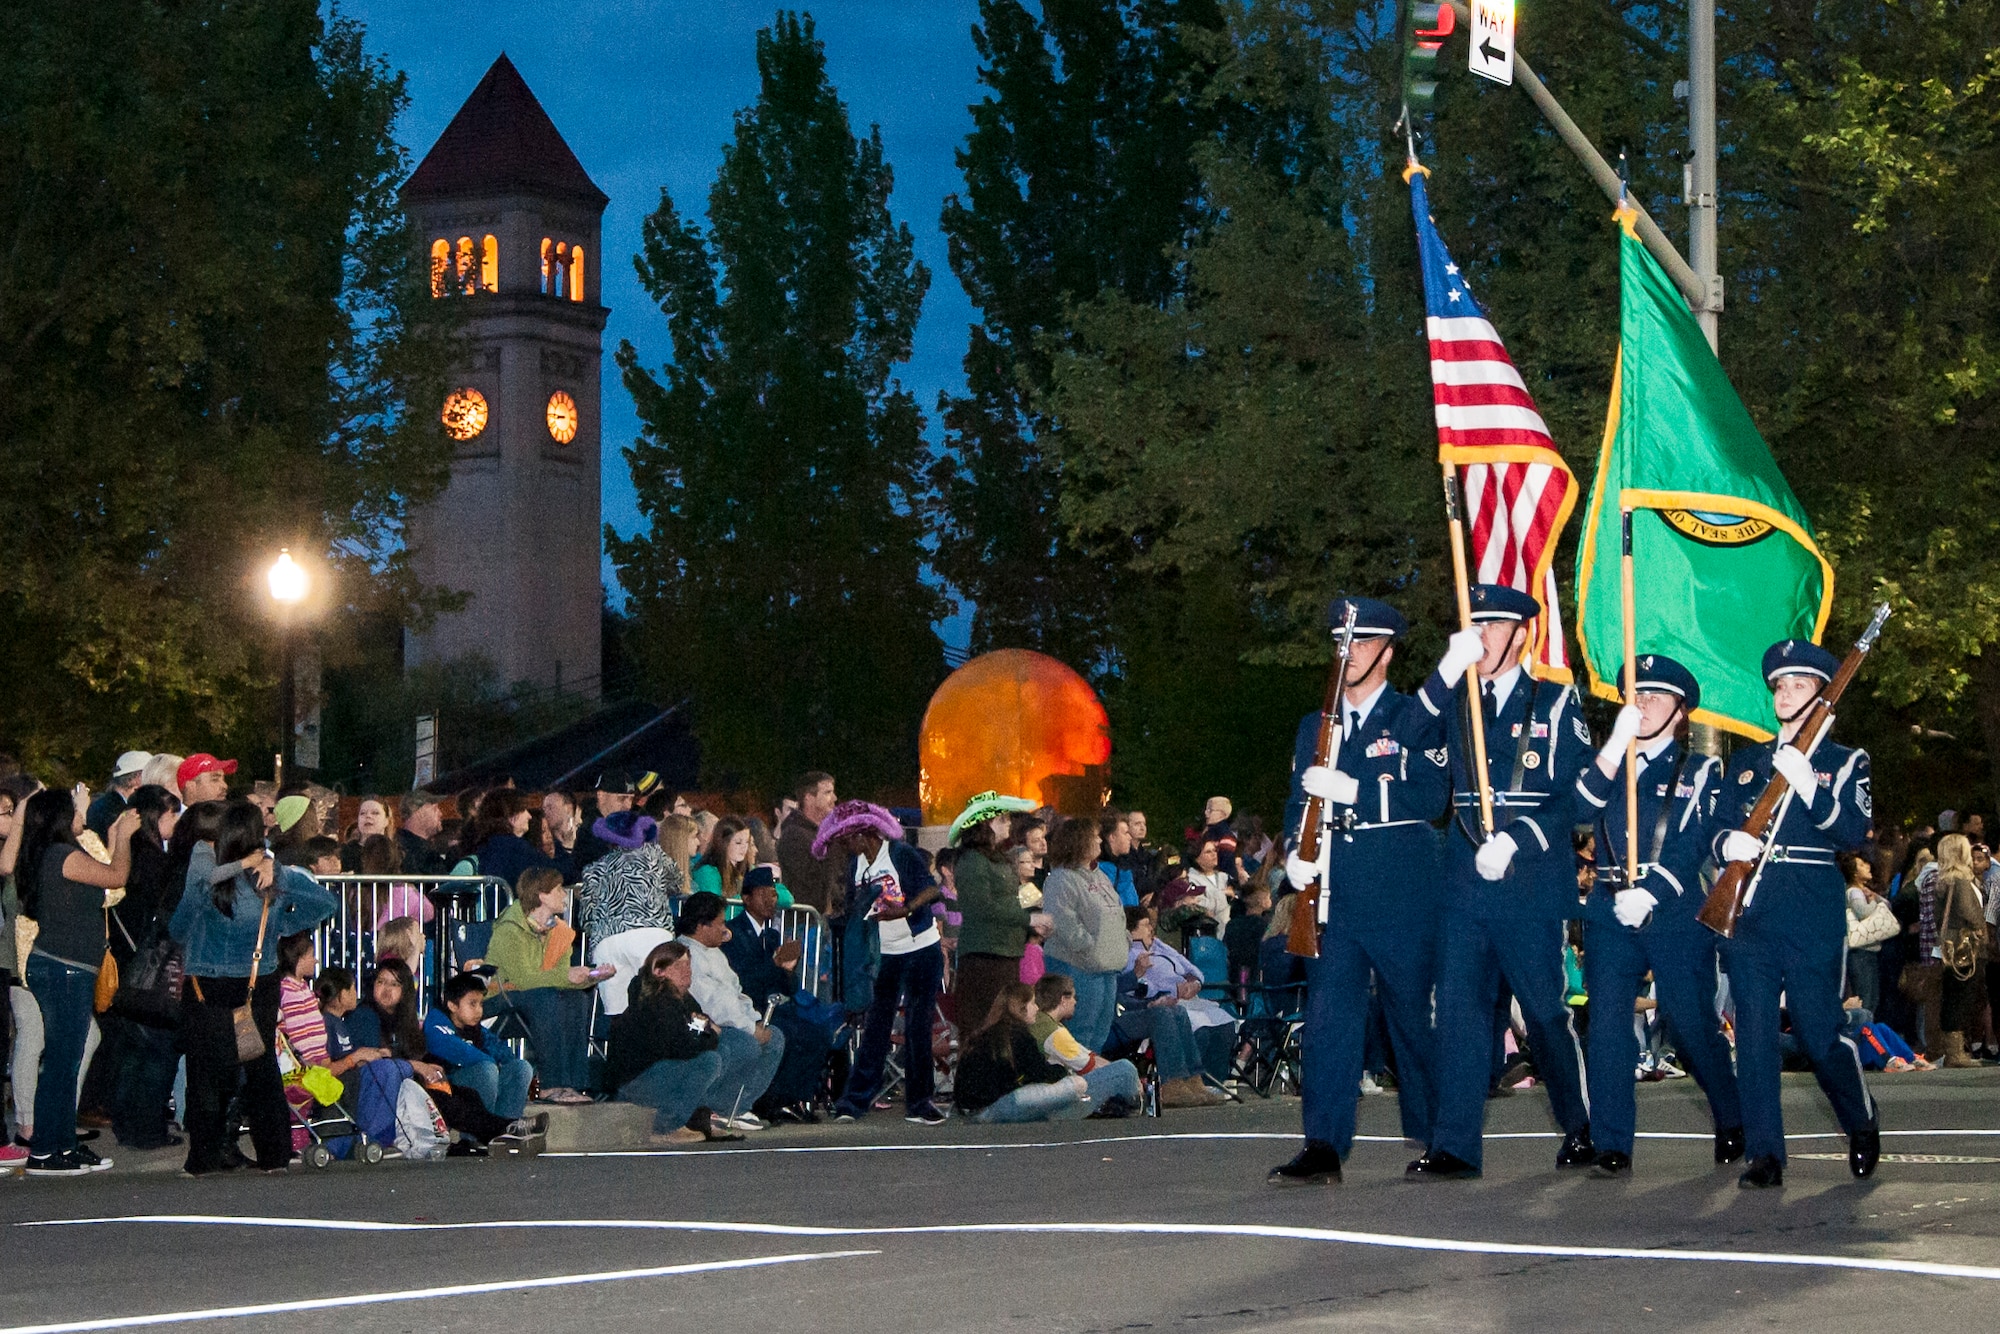 A Fairchild color guard marches as part of the 75th Annual Lilac Festival Armed Forced Torchlight Parade in Spokane, Wash., May 17, 2014. The parade is the largest armed forces torchlight parade in the nation and is made to honor service members of both the past and present. (U.S. Air Force photo by Staff Sgt. Benjamin W. Stratton/Released)